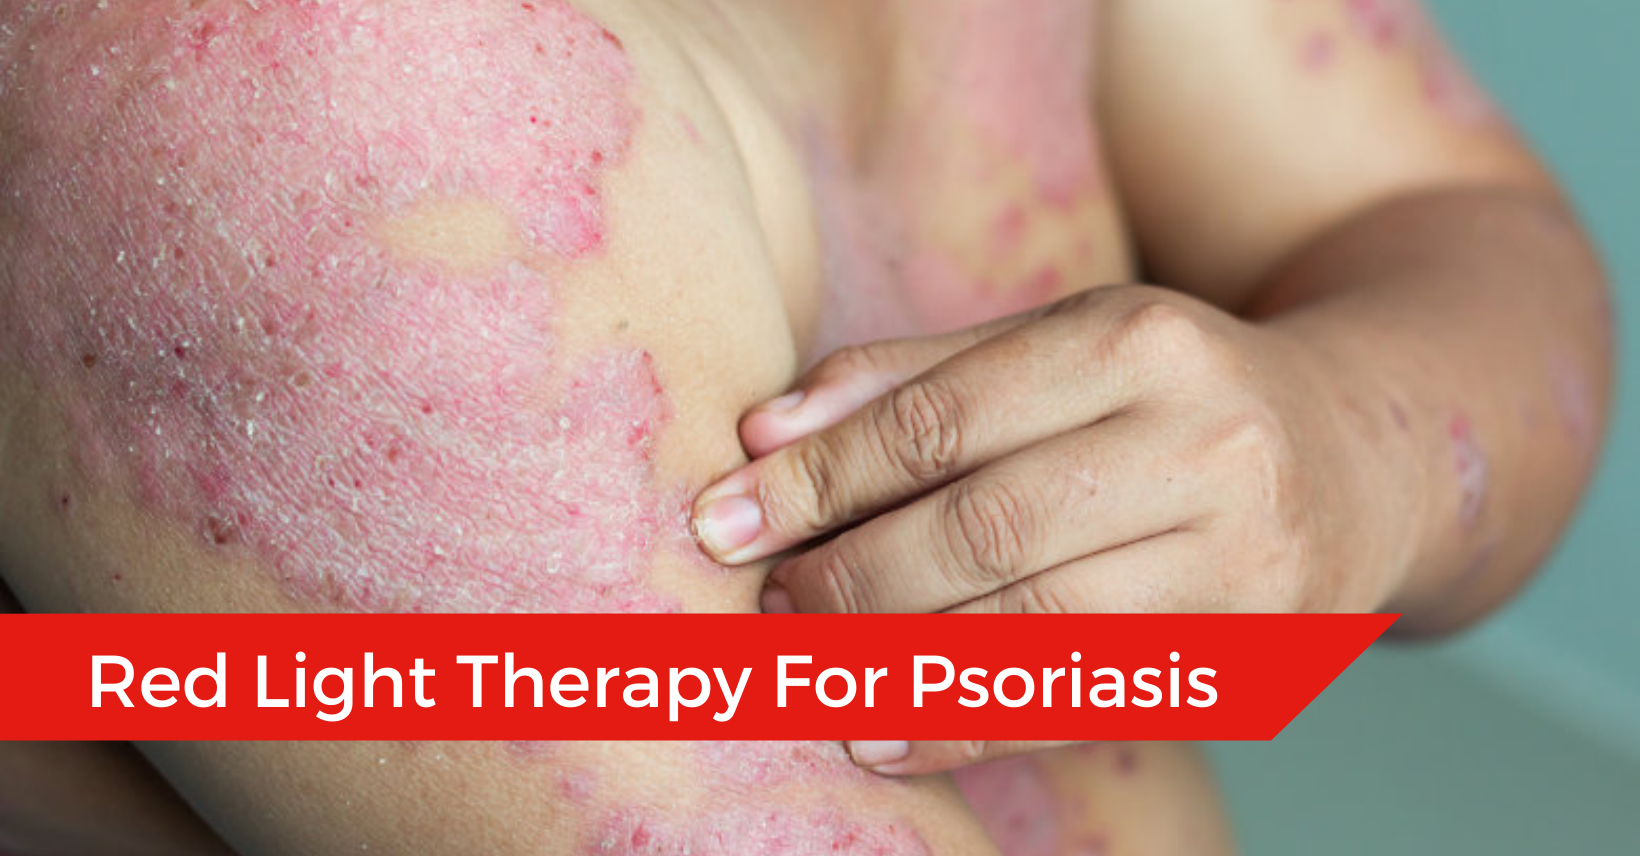 Red Light Therapy For Psoriasis Does